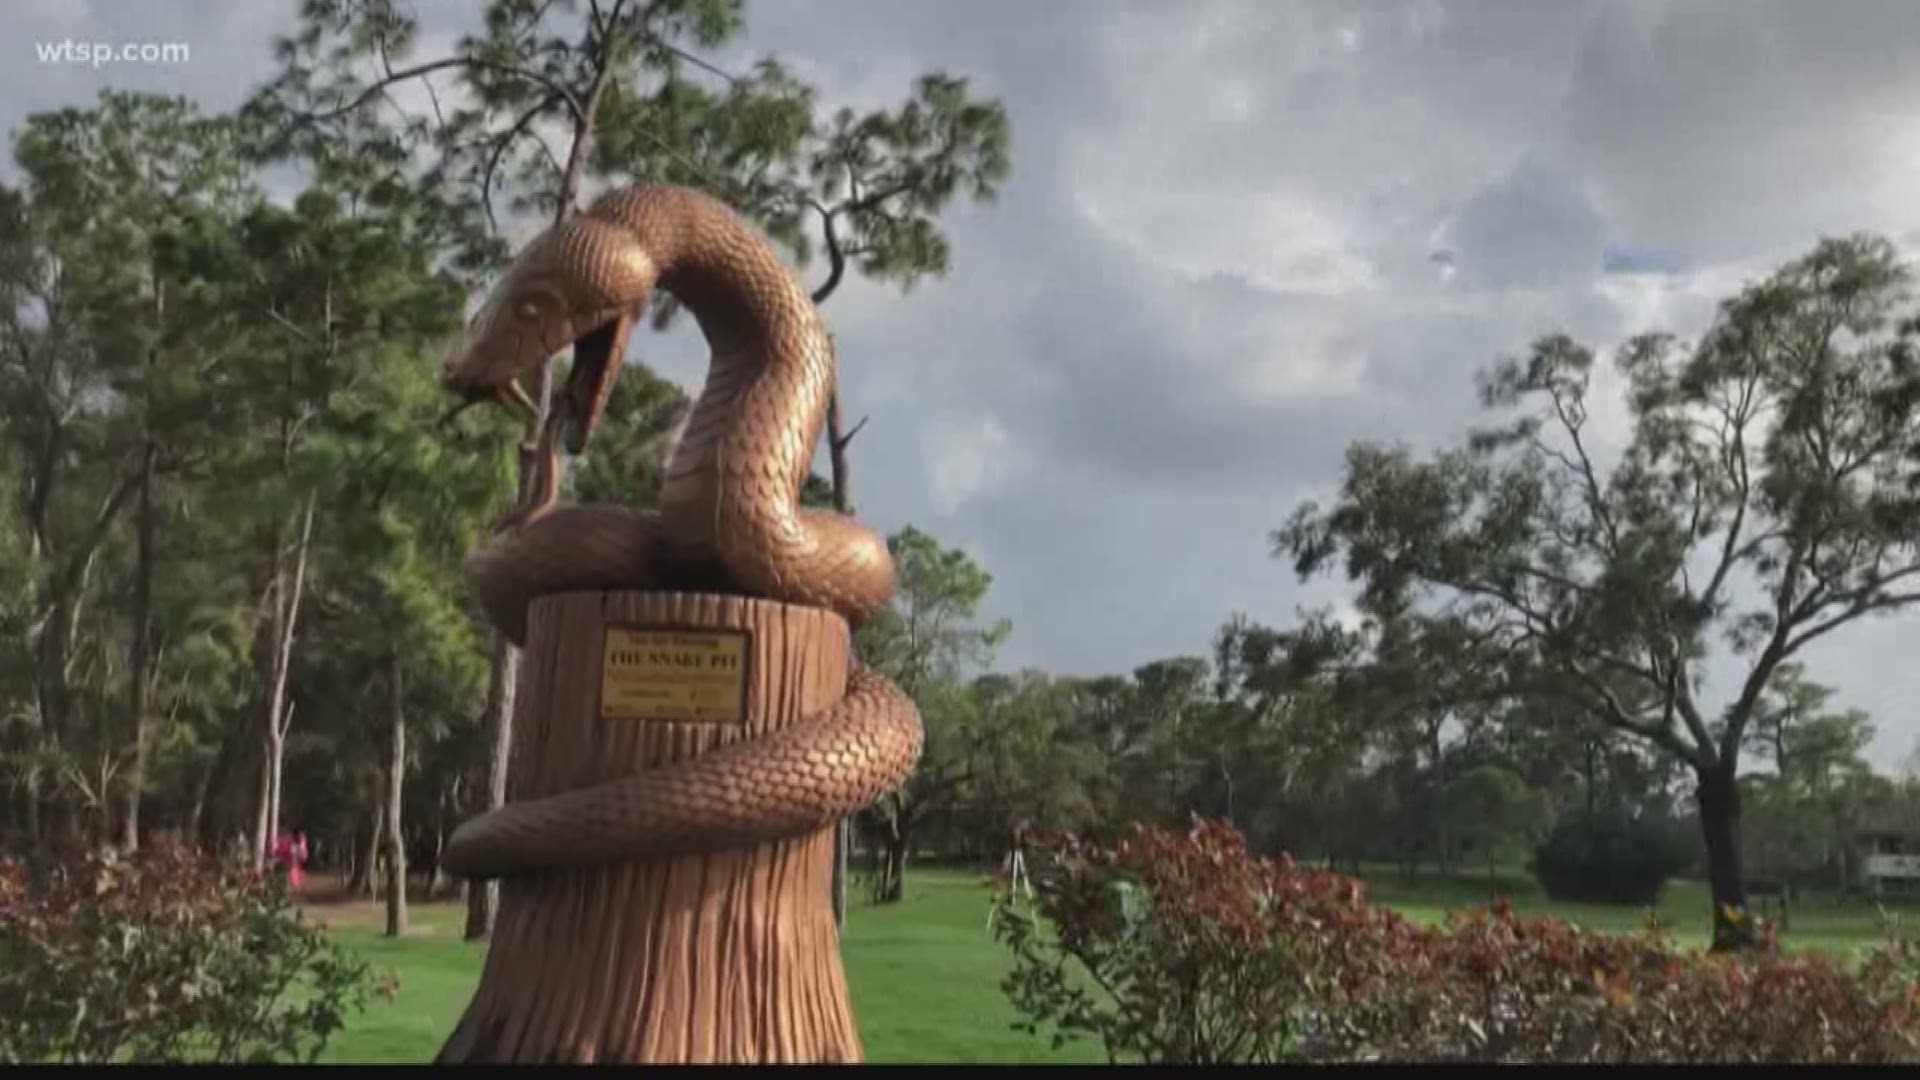 Fans at the Valspar tournament take photos at the iconic "Snake Pit" statue.